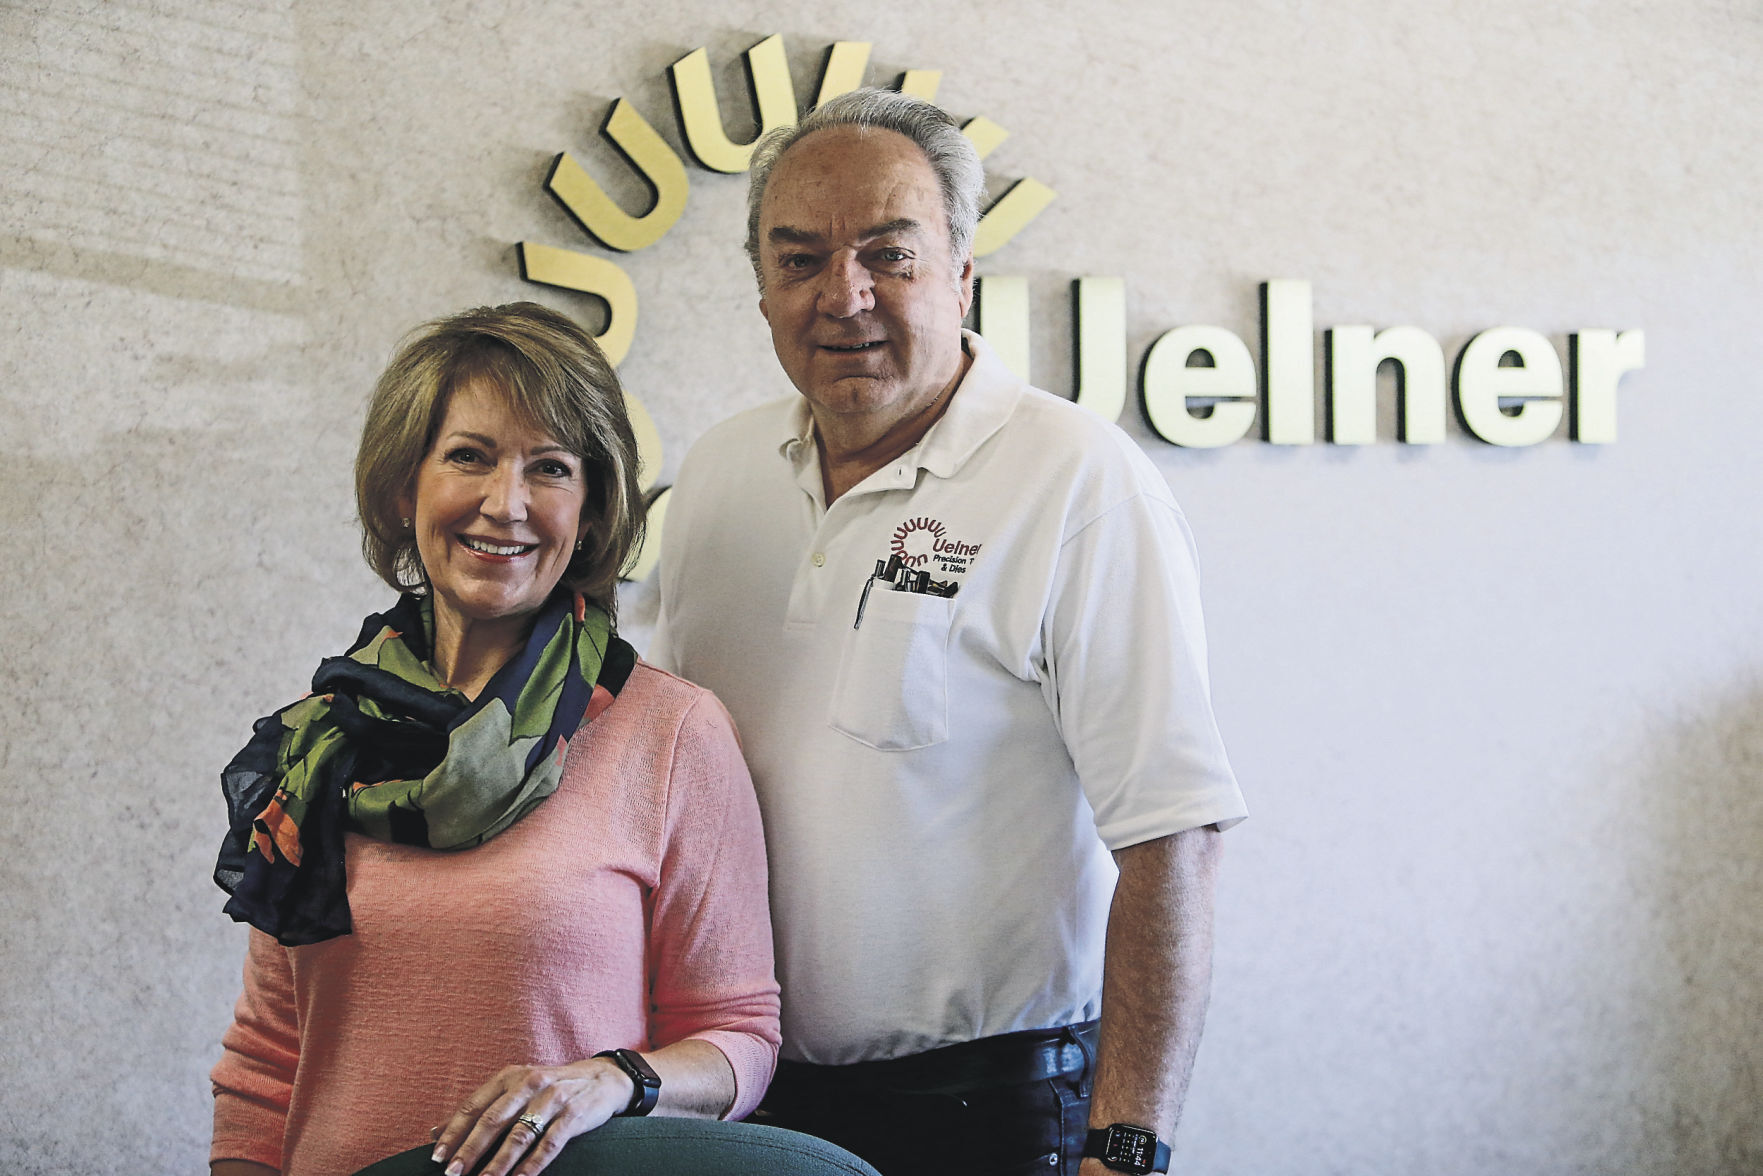 Jayne Uelner and her husband, Thomas, have prominent roles in Uelner Precision Tools & Dies.    PHOTO CREDIT: Dave Kettering